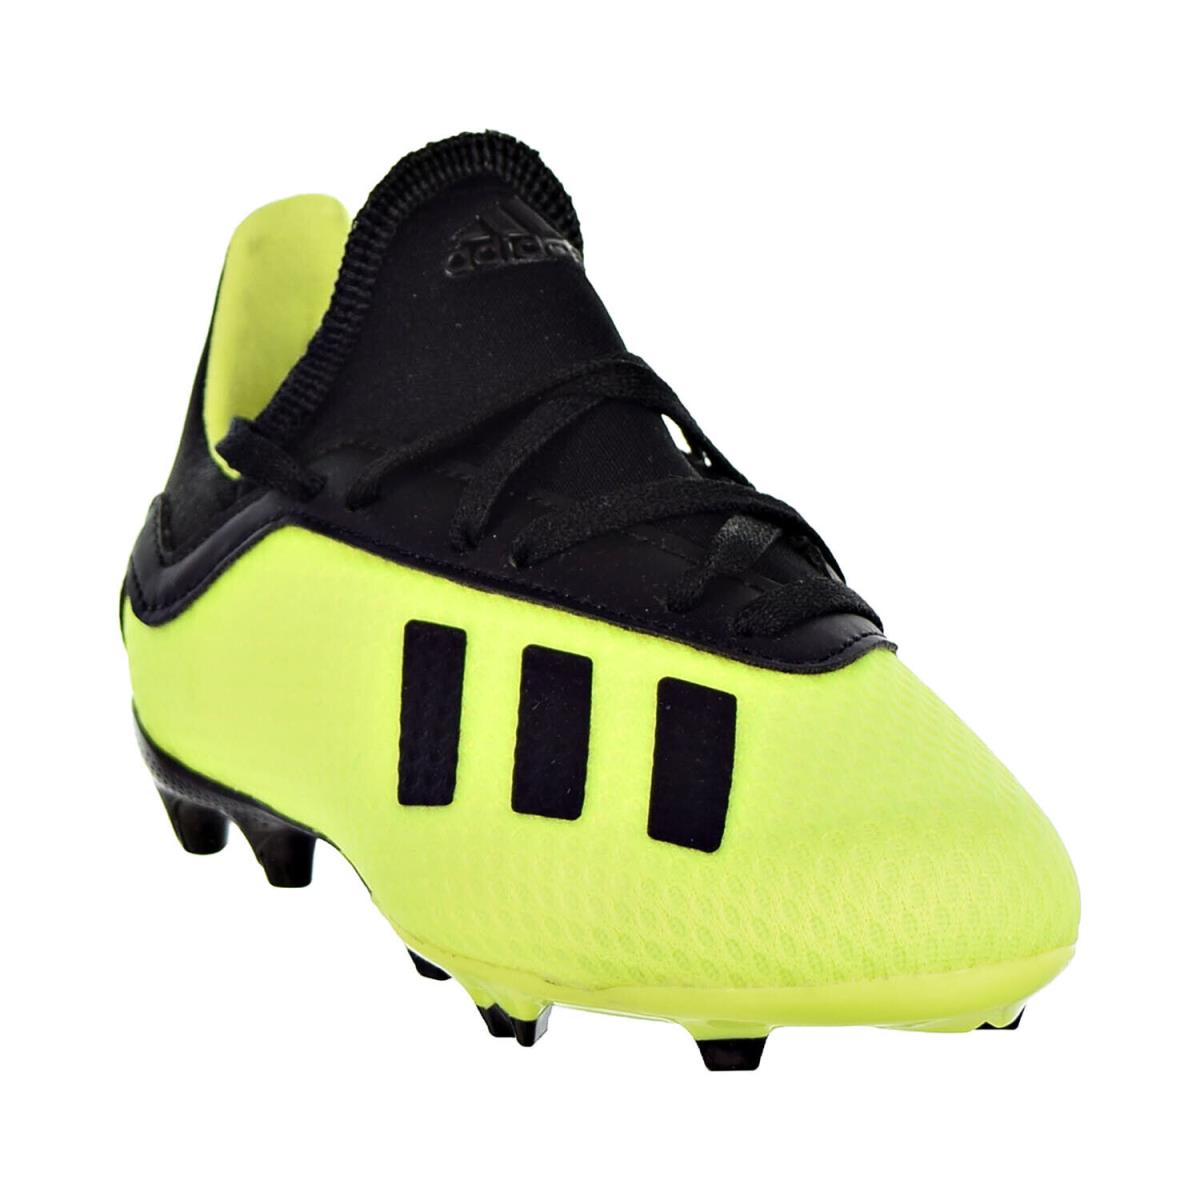 Adidas X 18.3 Firm Ground Kids Shoes Solar Yellow-core Black DB2418 - Solar Yellow/Core Black